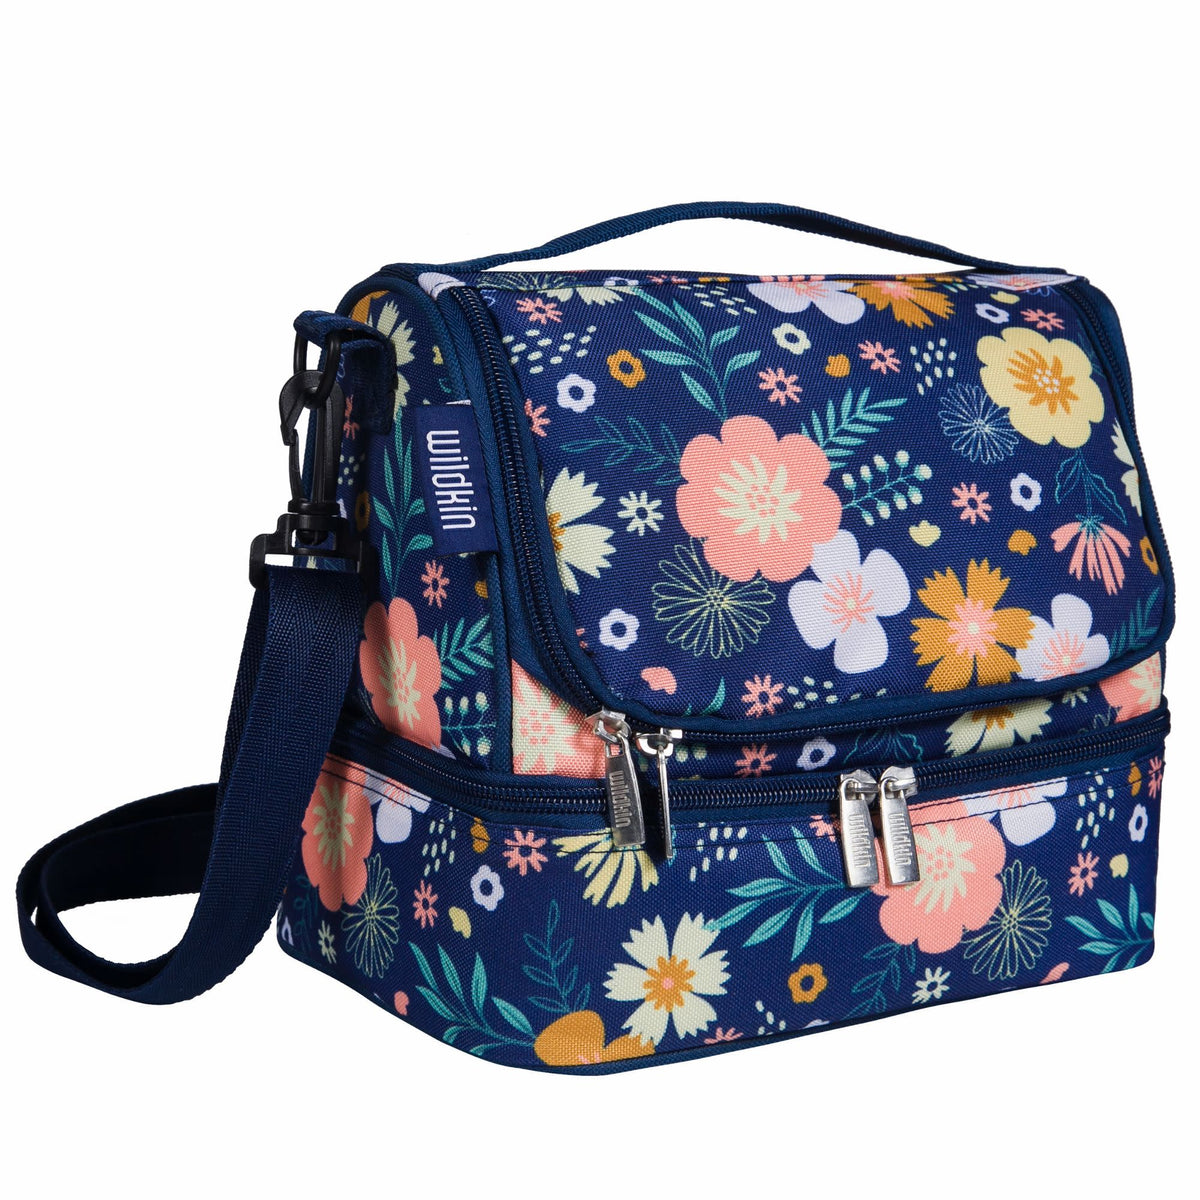 https://www.shopwildkin.shop/wp-content/uploads/1691/33/we-are-proud-of-giving-each-customer-in-our-store-as-if-they-are-family-helping-customers-locate-wildflower-bloom-two-compartment-lunch-bag-wildkin-is-what-we-do_0.jpg